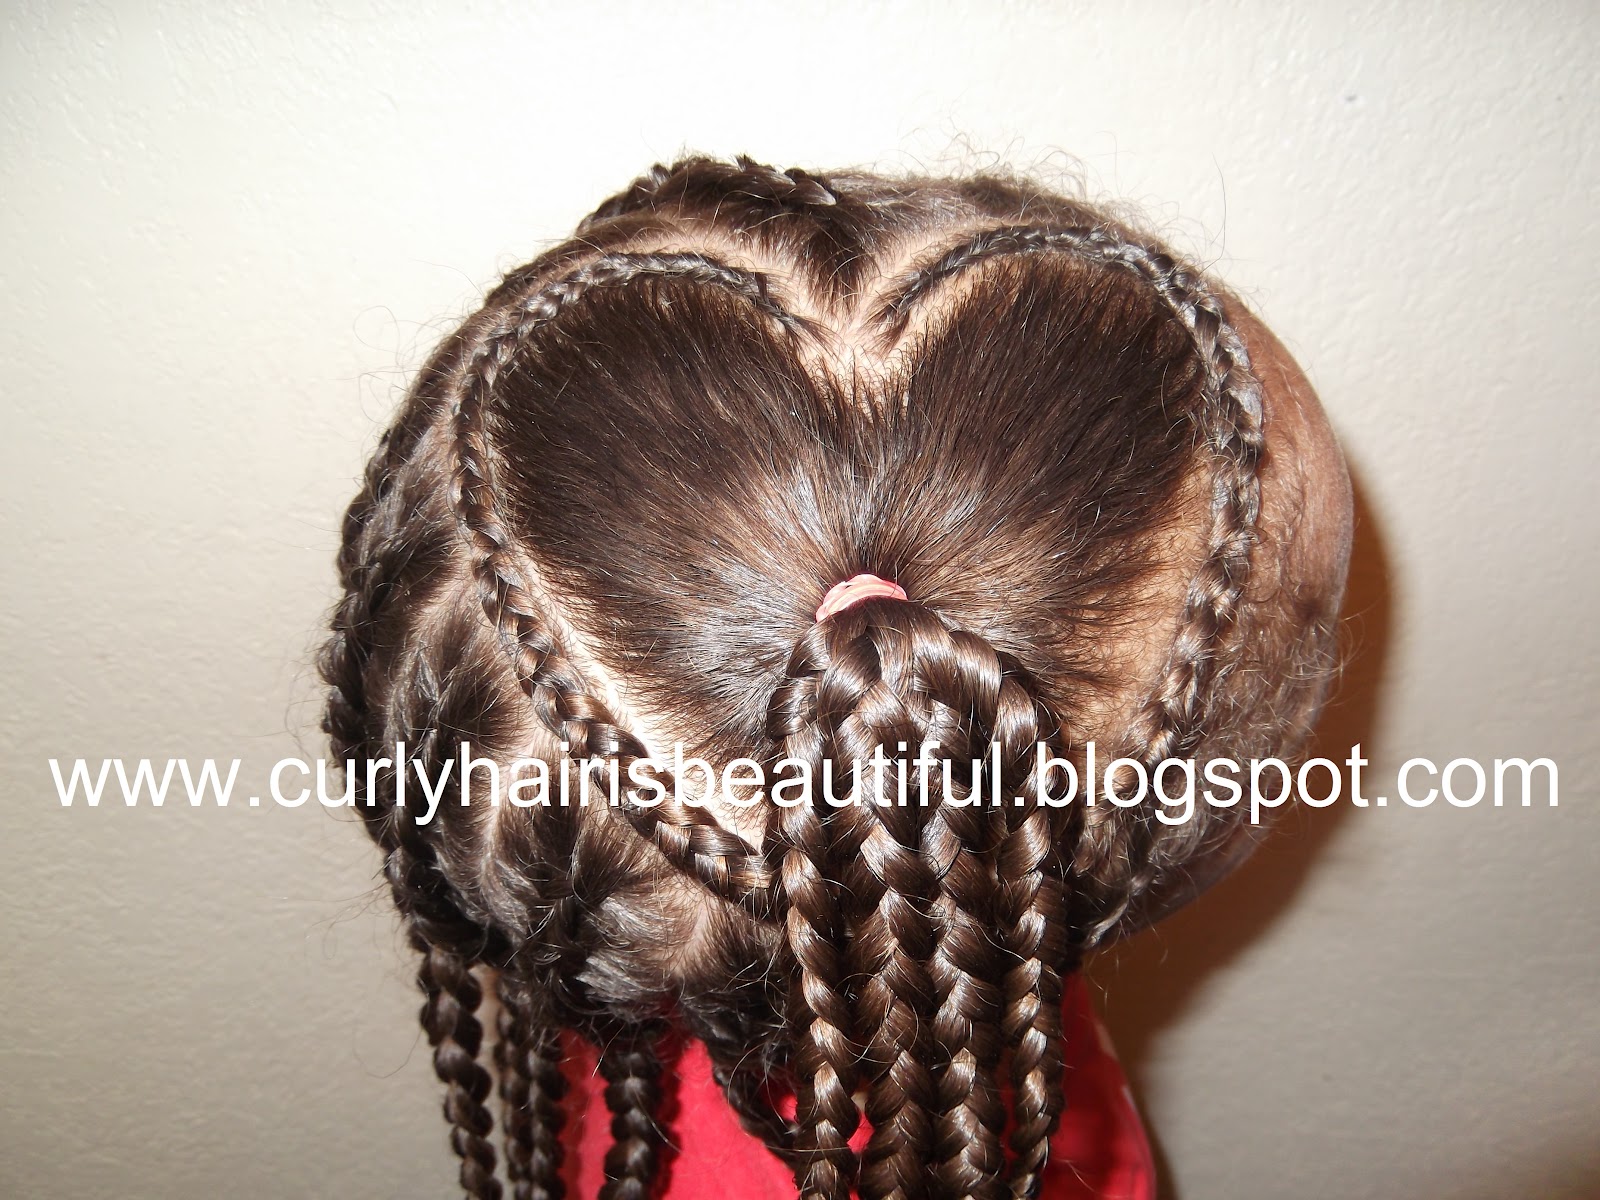 Curly Hair Is Beautiful!: Heart Shaped Pony With Big ...